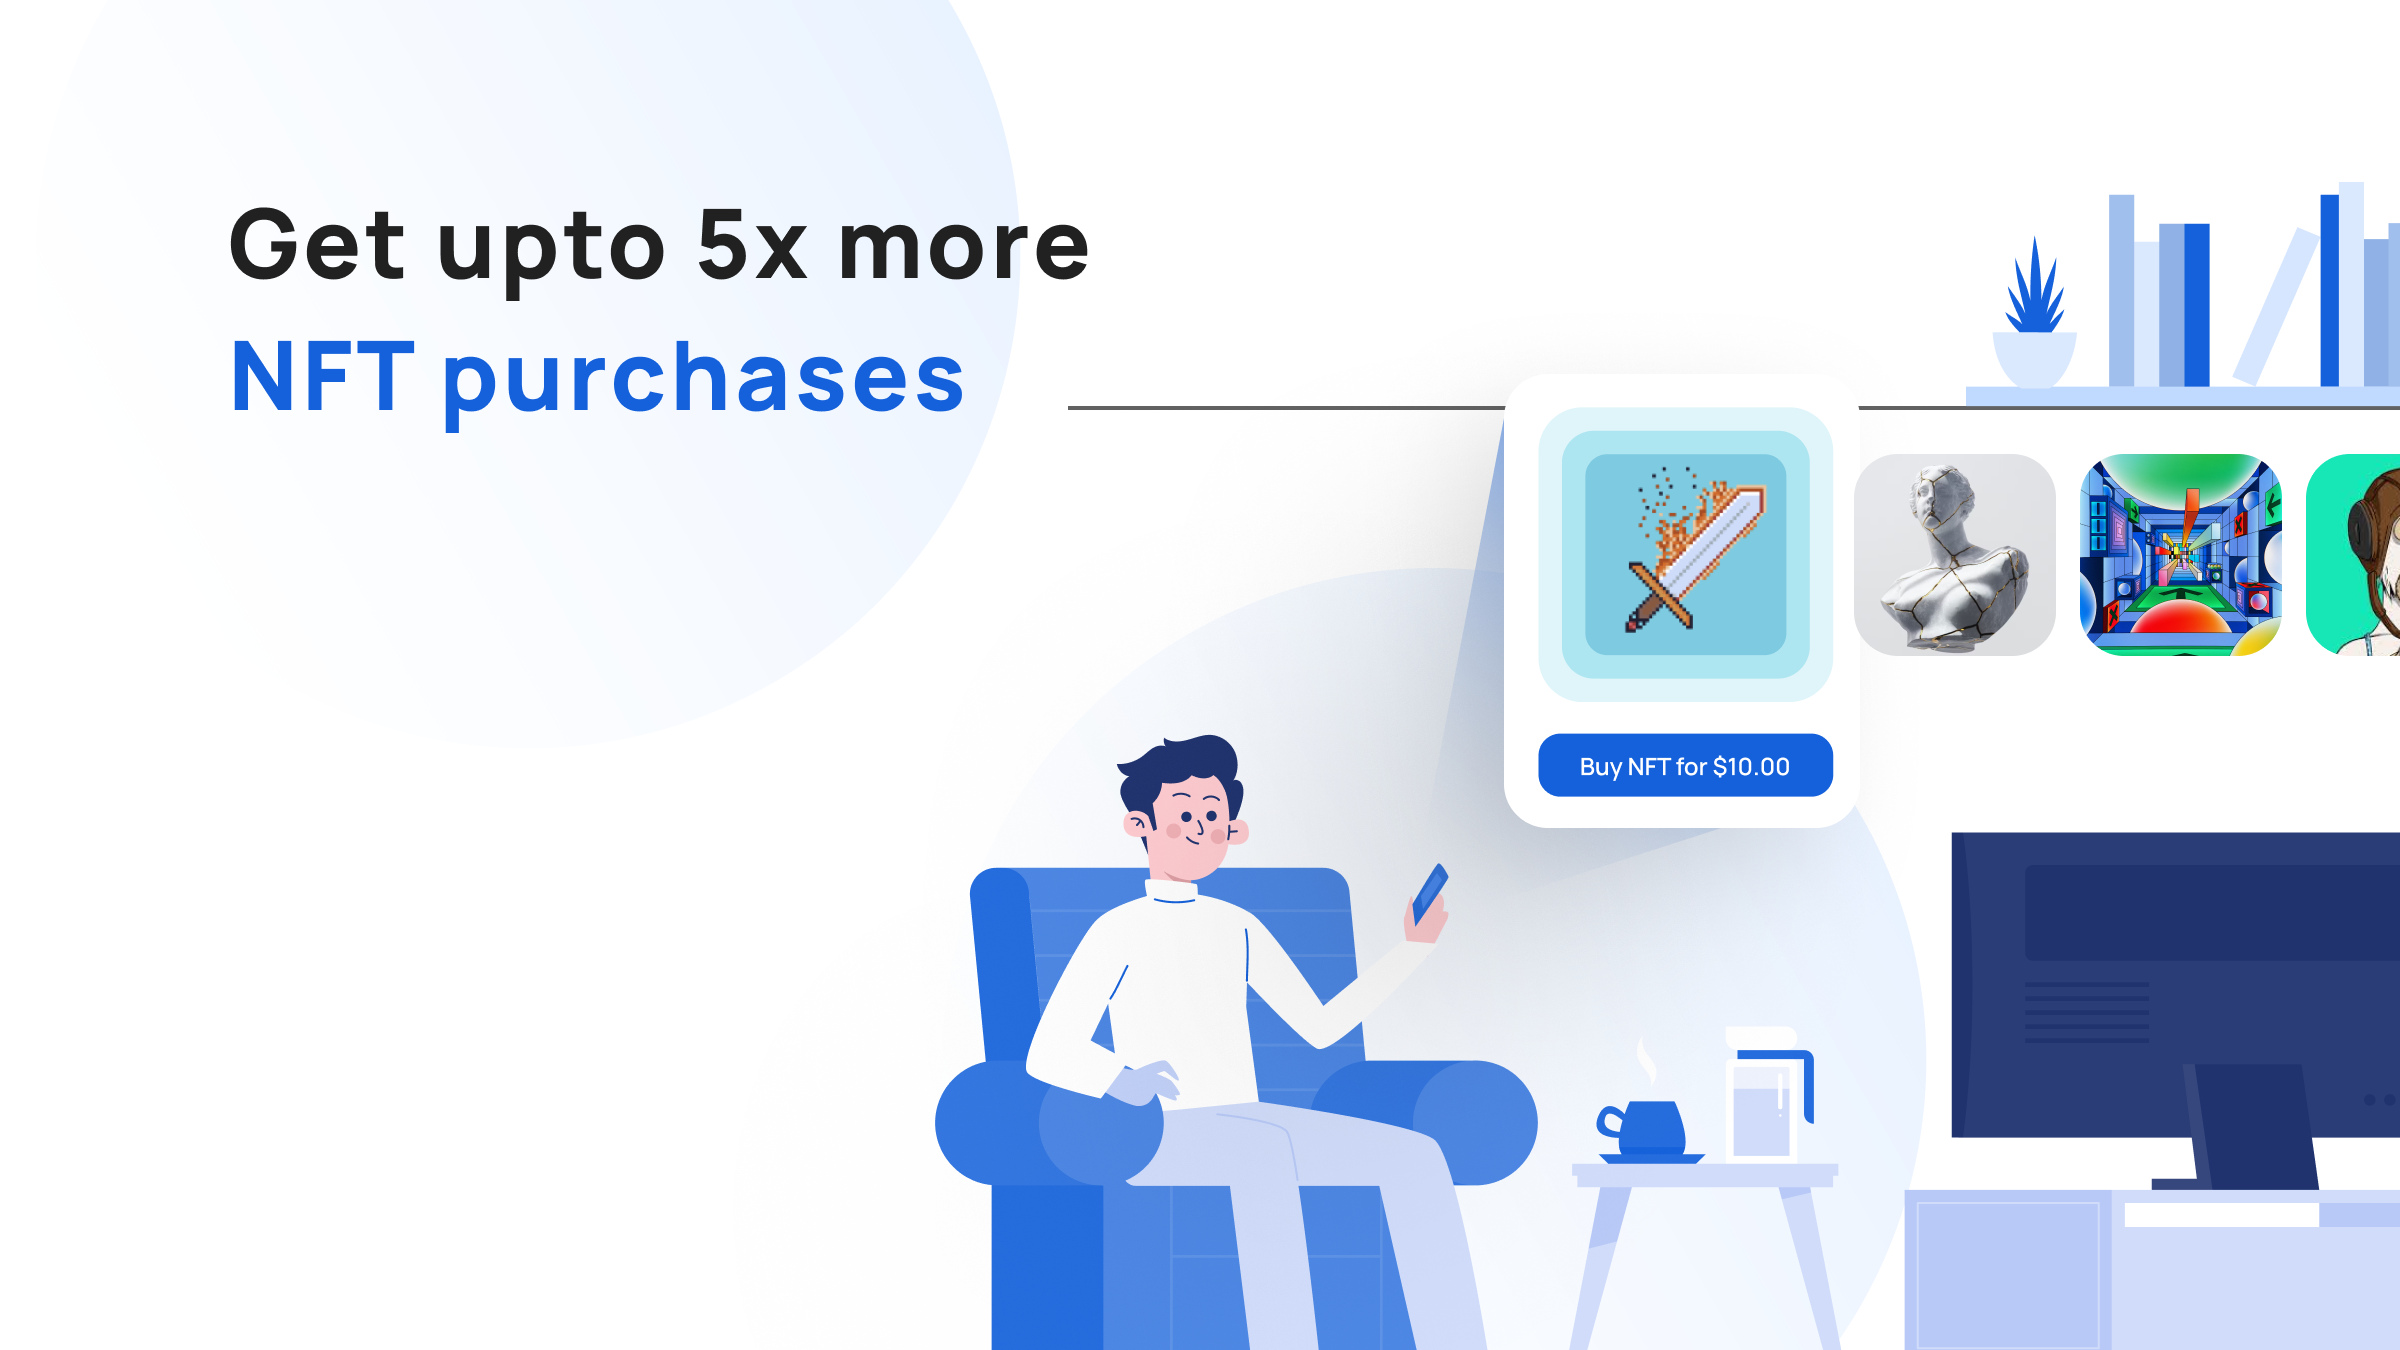 Get upto 5x more NFT purchases